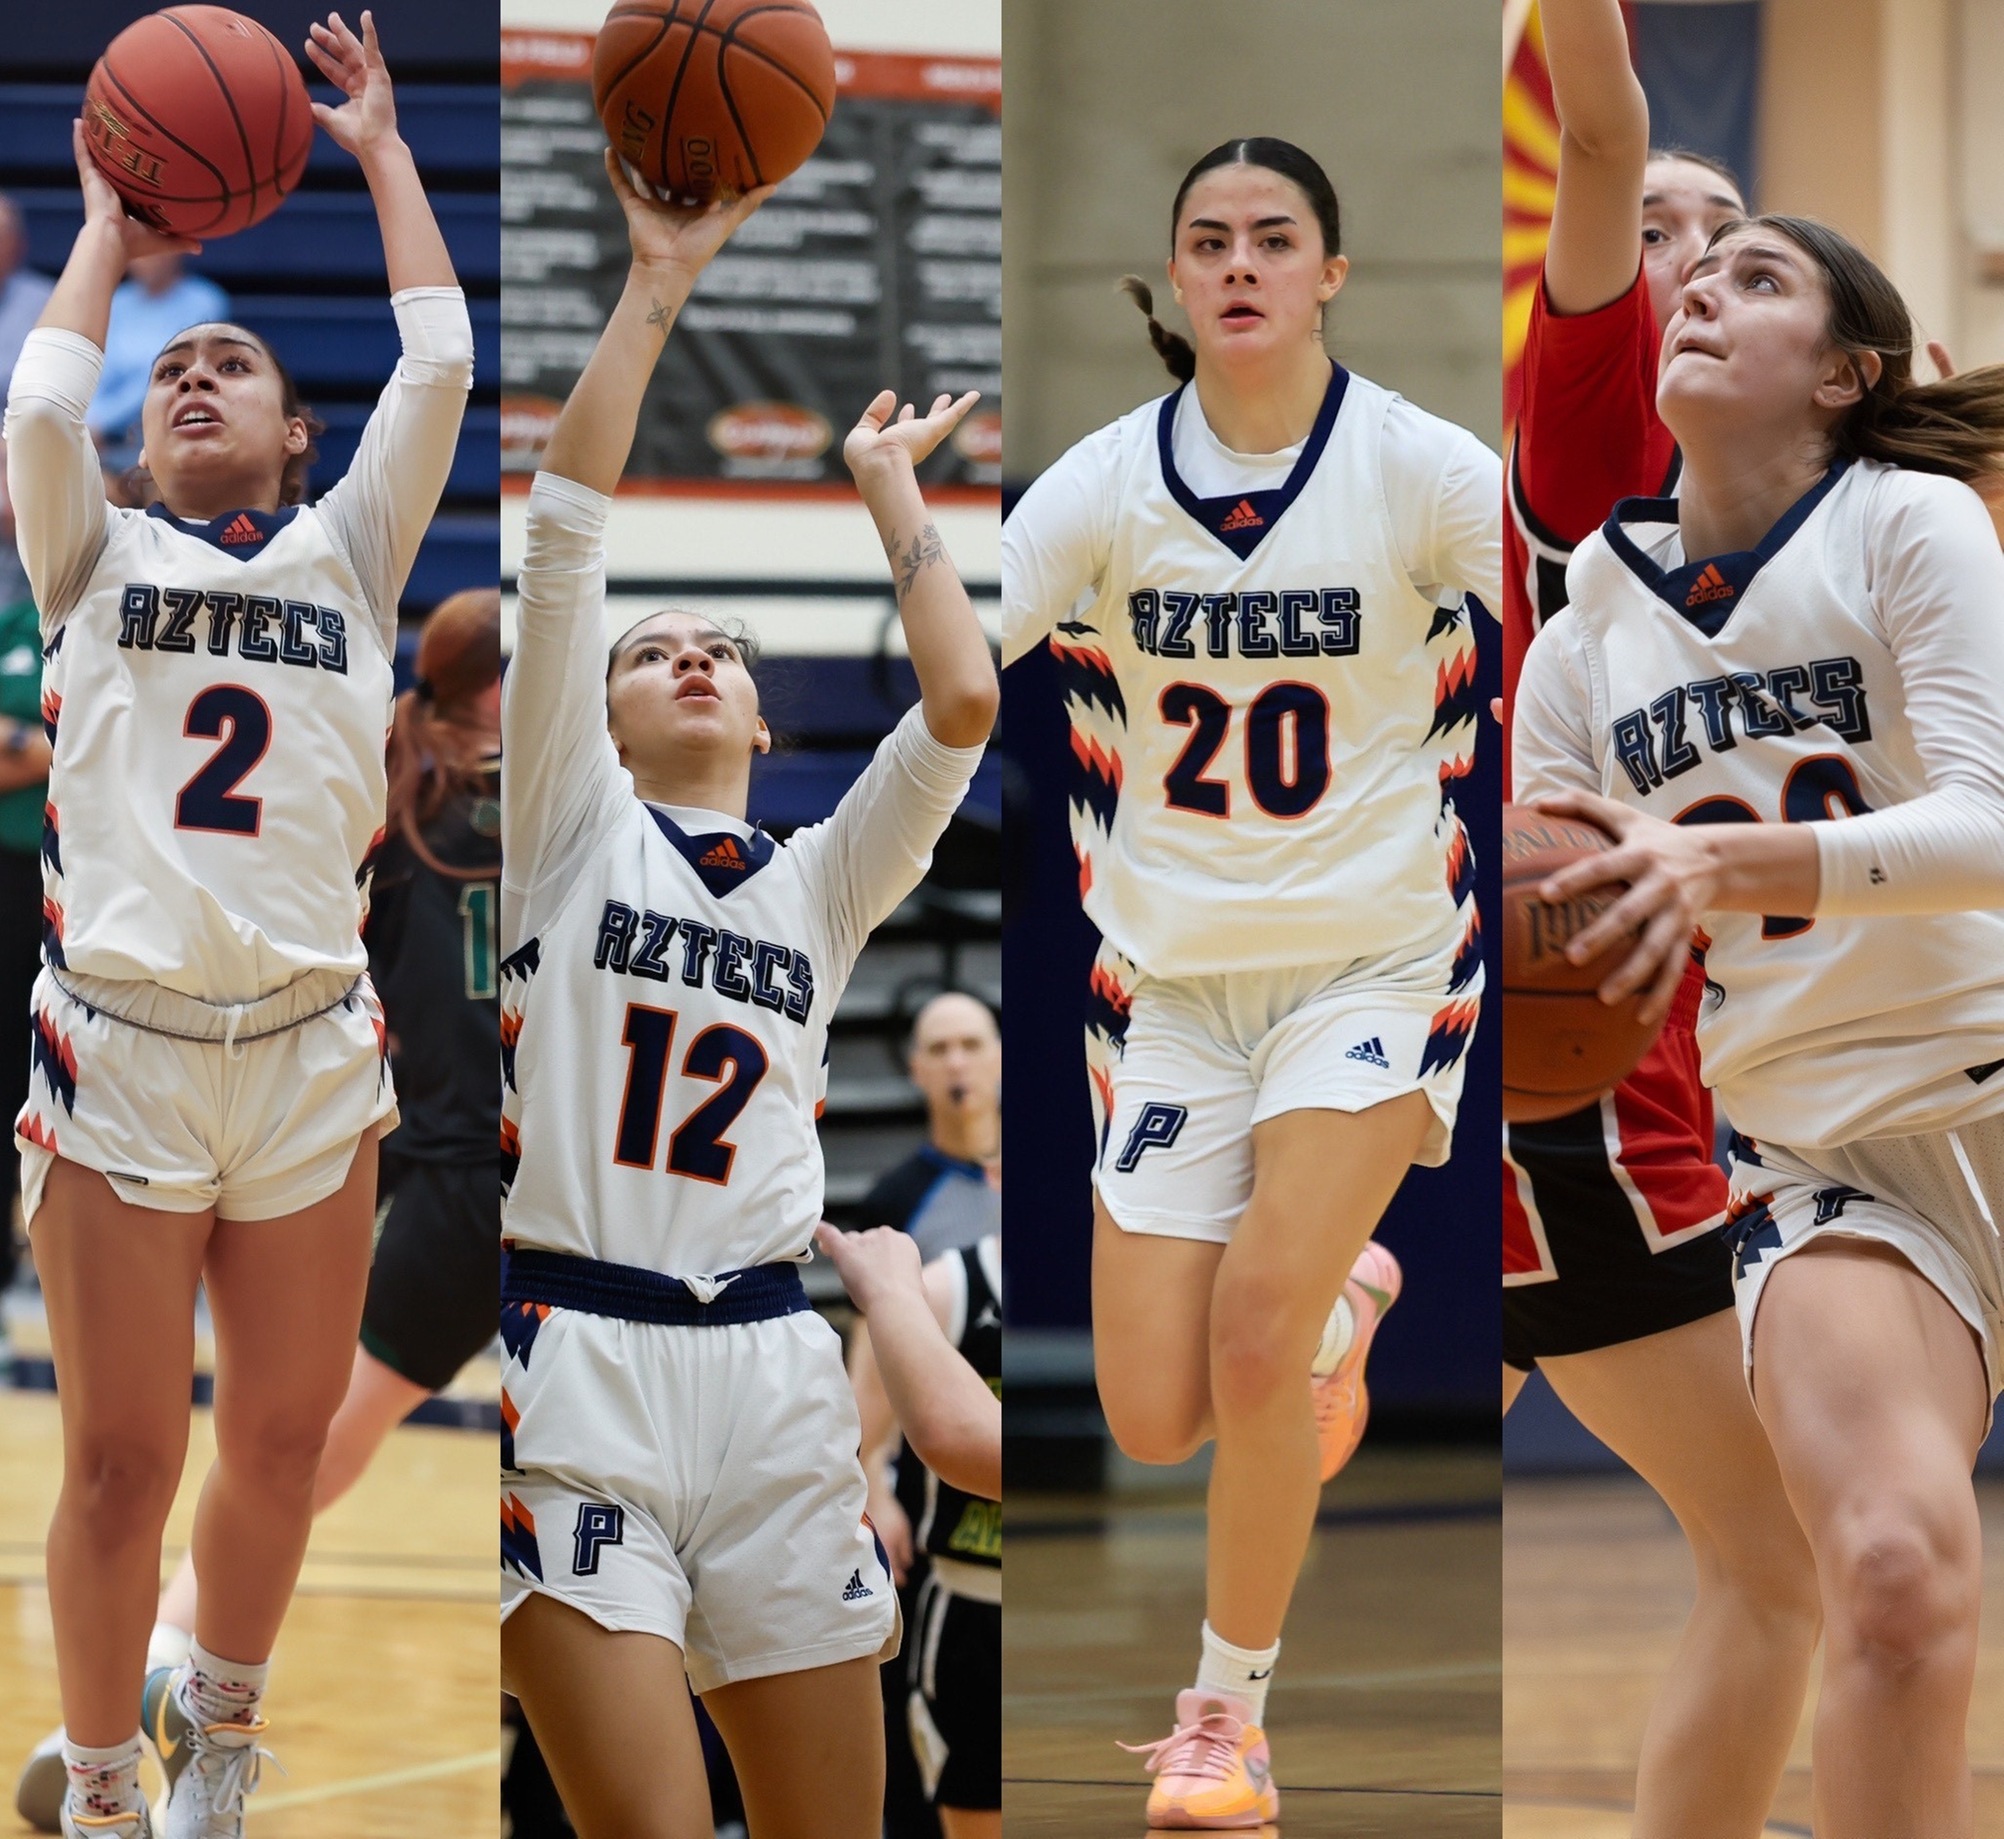 The Aztecs Women's Basketball team was well represented on the All-ACCAC and All-Region Teams. Freshman Rylei Waugh was named ACCAC Division II Player of the Year. Sophomore Dominique Acosta was named First Team All-ACCAC and Second Team All-Region. Freshman Gabby Lopez was selected ACCAC Division II Defensive Player of the Year. Freshman Rori Hoffmeyer earned Second Team All-ACCAC honors. Photos by Stephanie van Latum